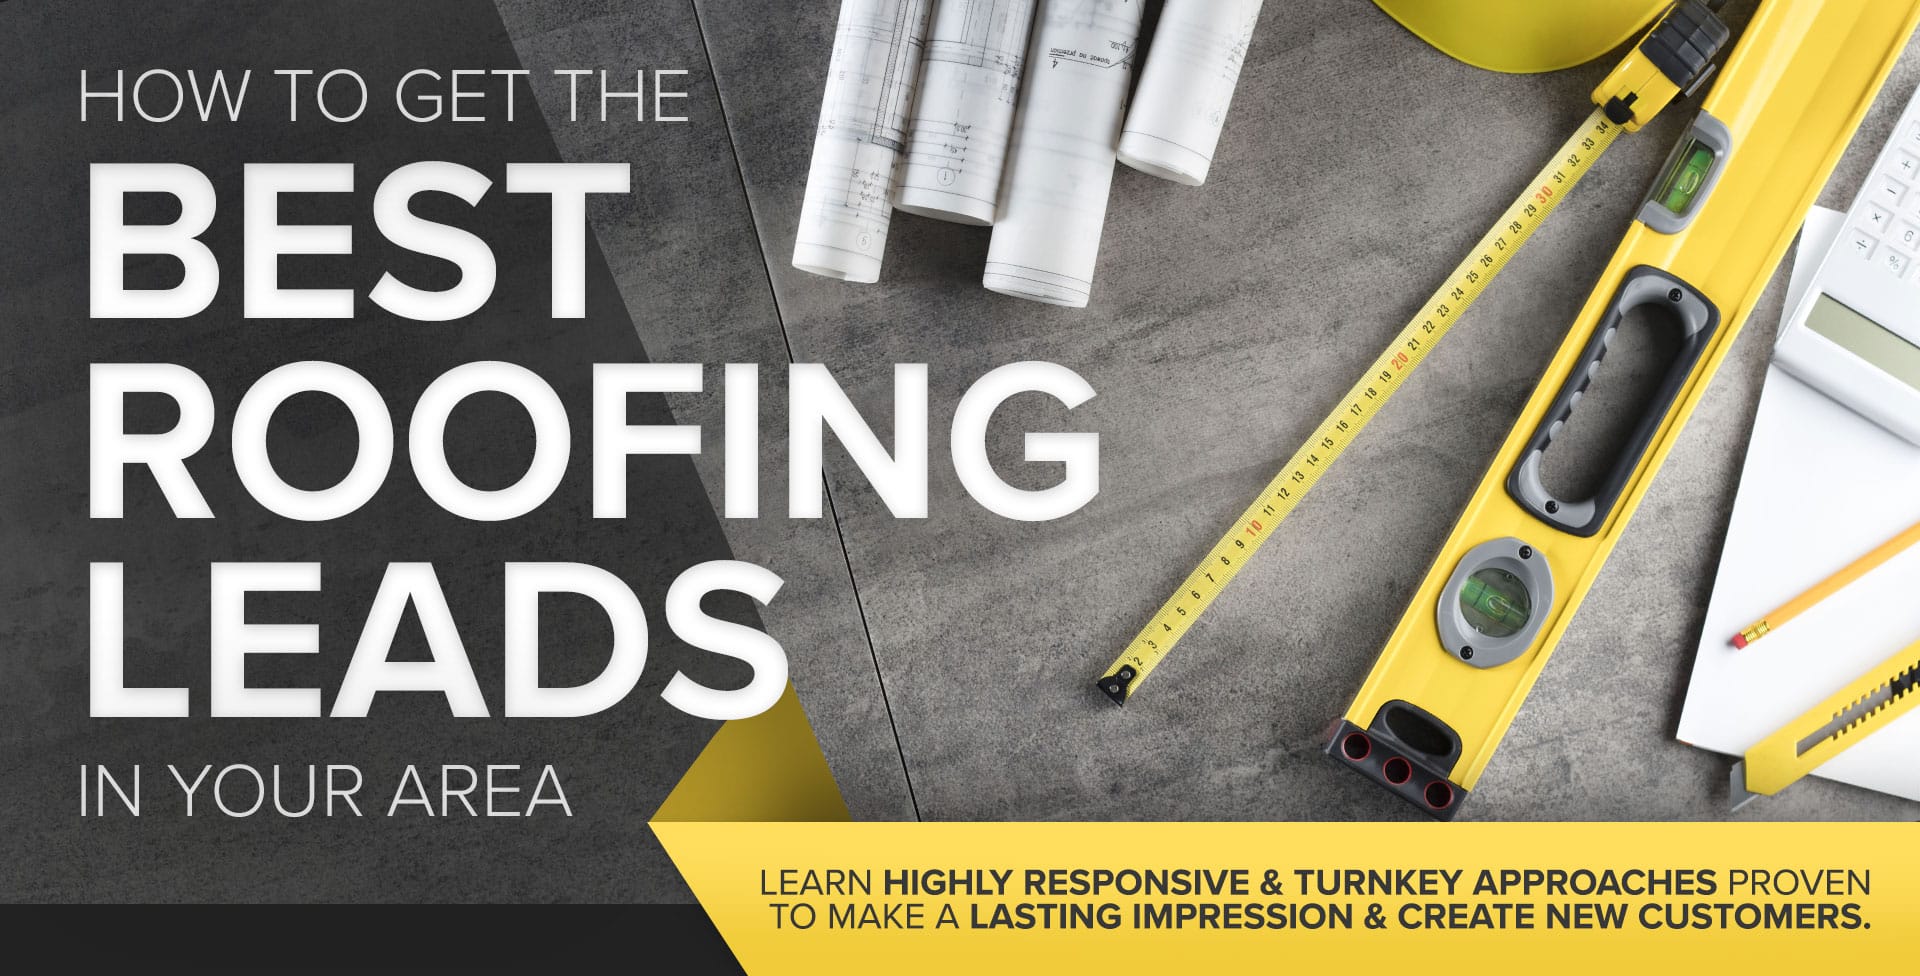 How to get the best roofing leads in your area